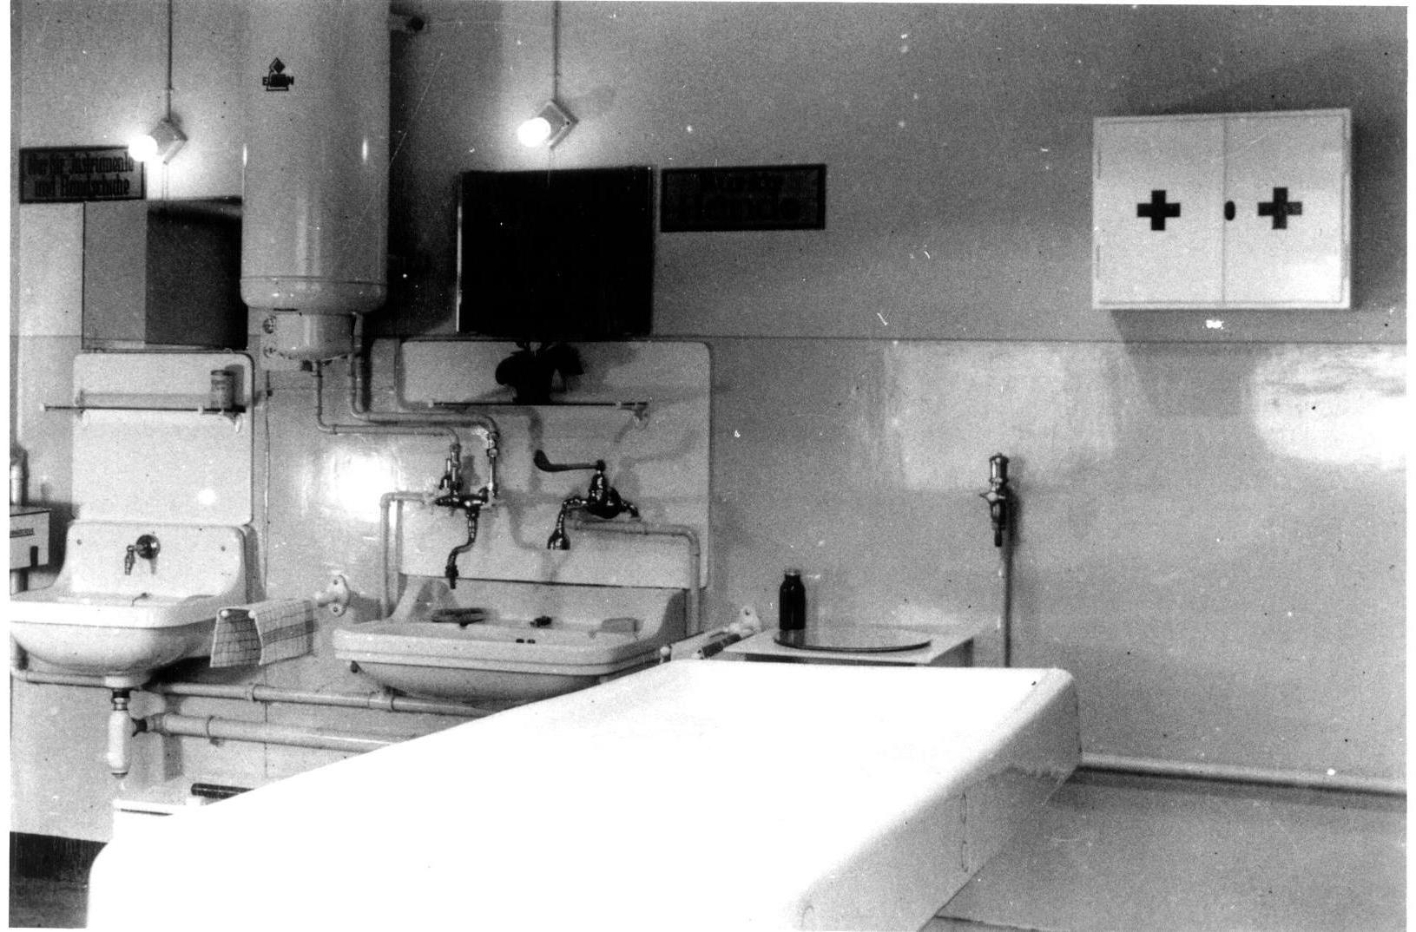 Dissection room of the pathology department in the annex of the crematorium. Center: Dissecting table. Left: Wash basin. Right on the wall: medicine cabinet with red cross.